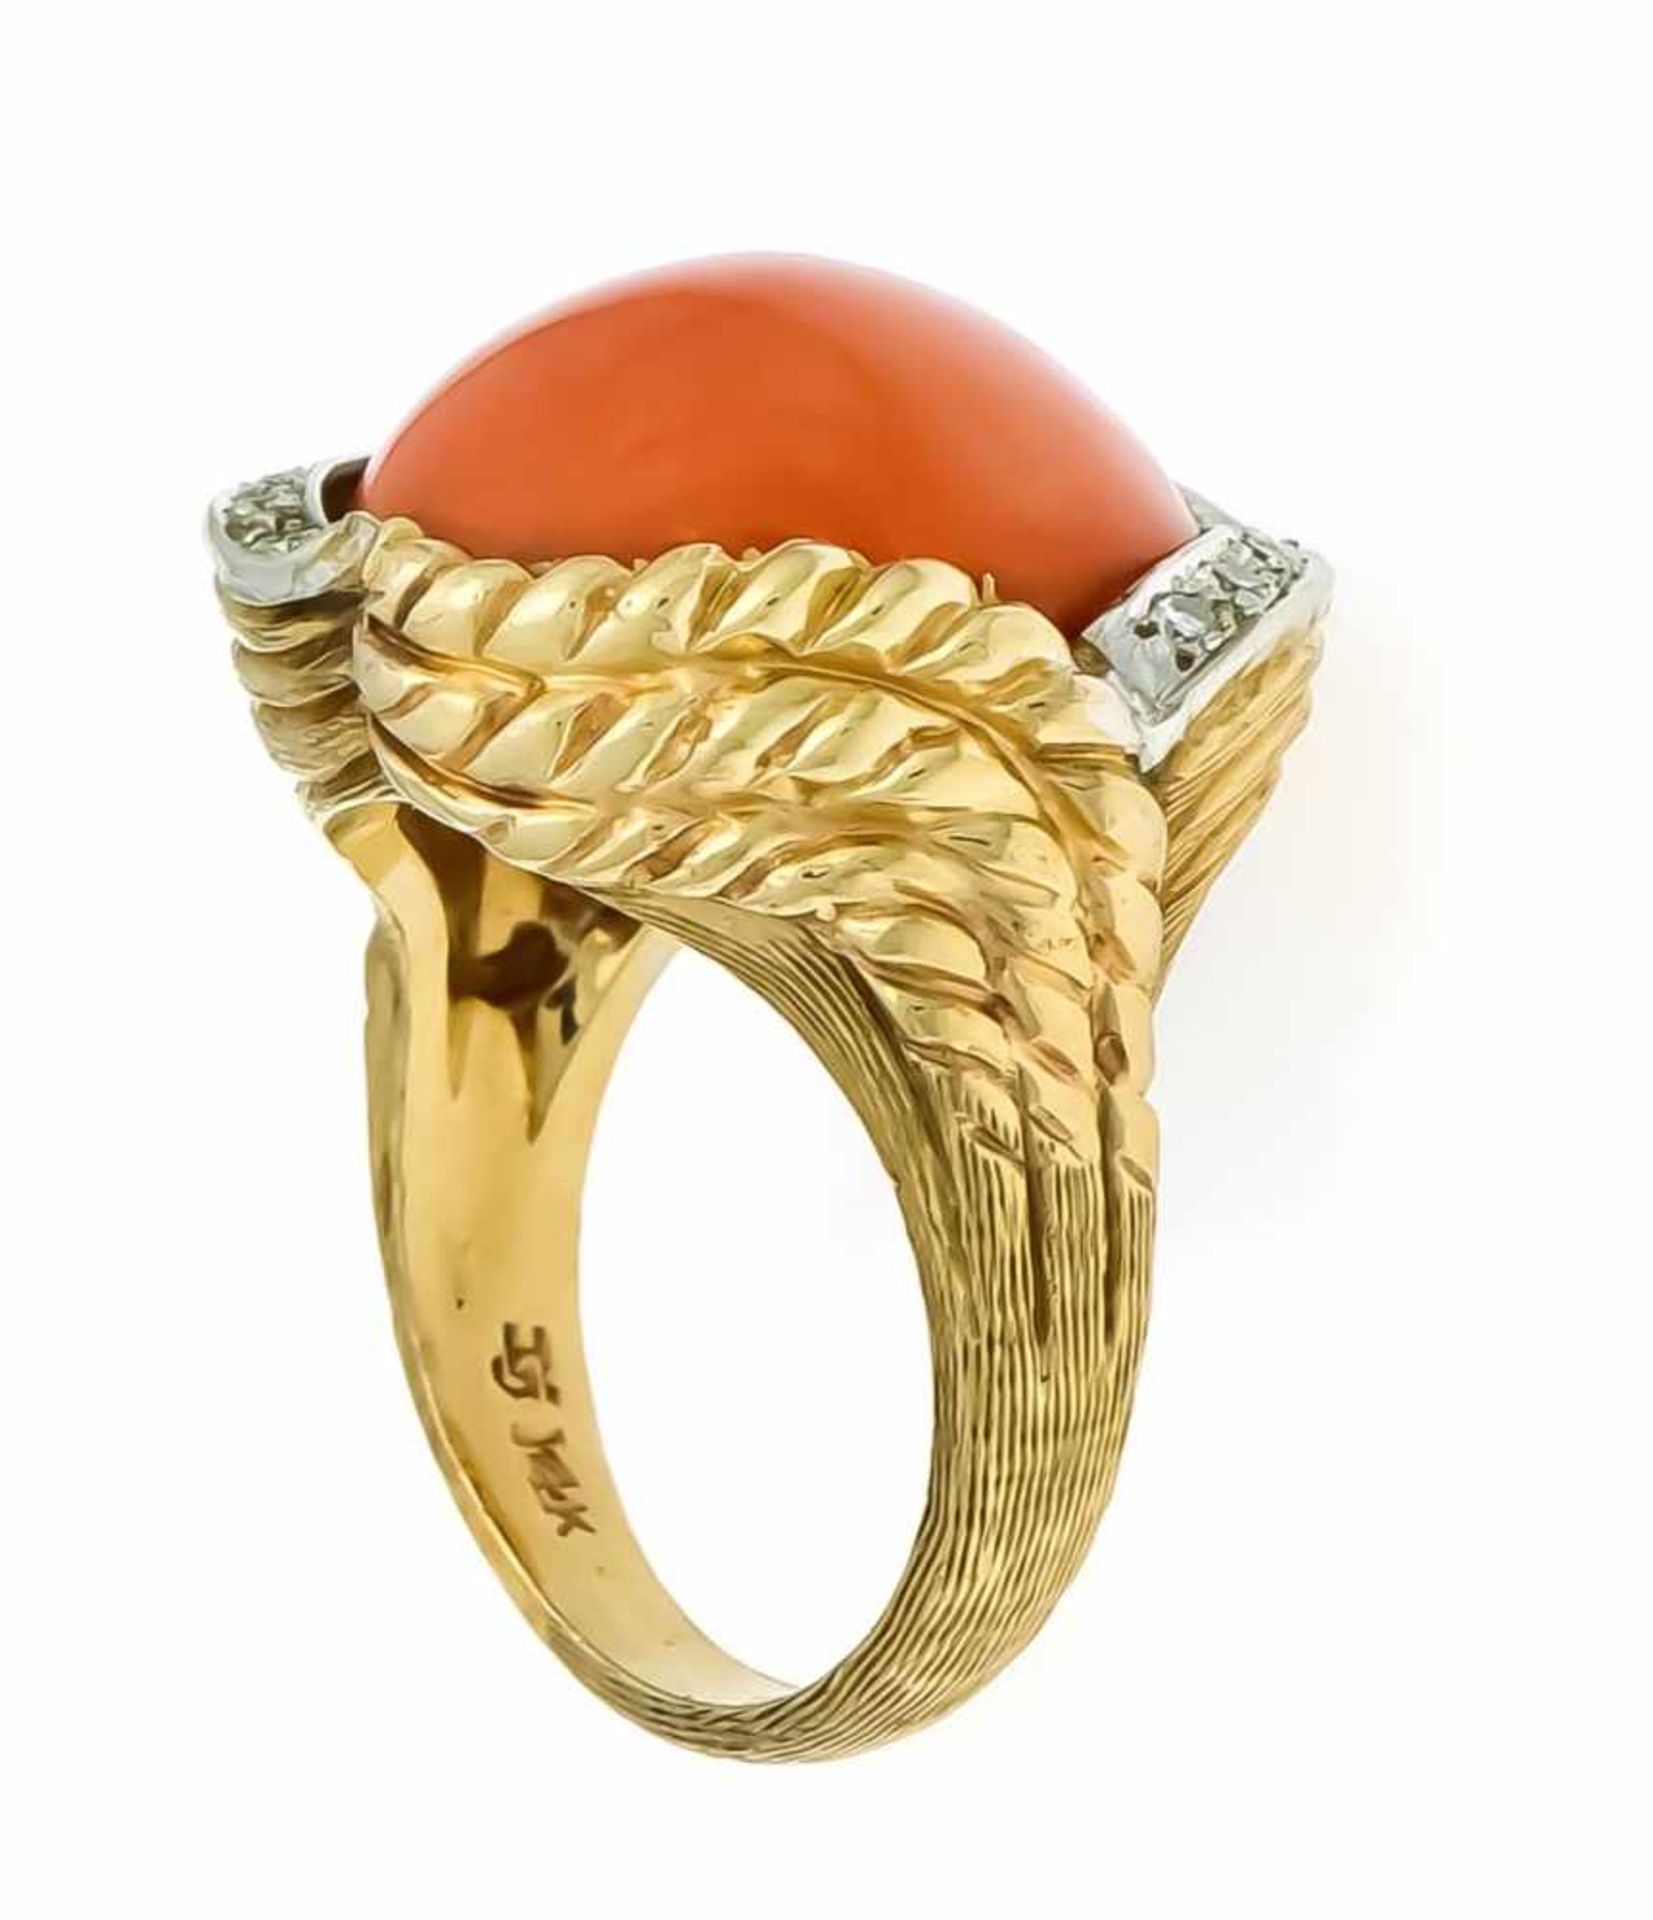 Coral ring RG / WG 585/000 with an orange-red, round coral cabochon 16 mm and 10 diamonds, - Bild 2 aus 2